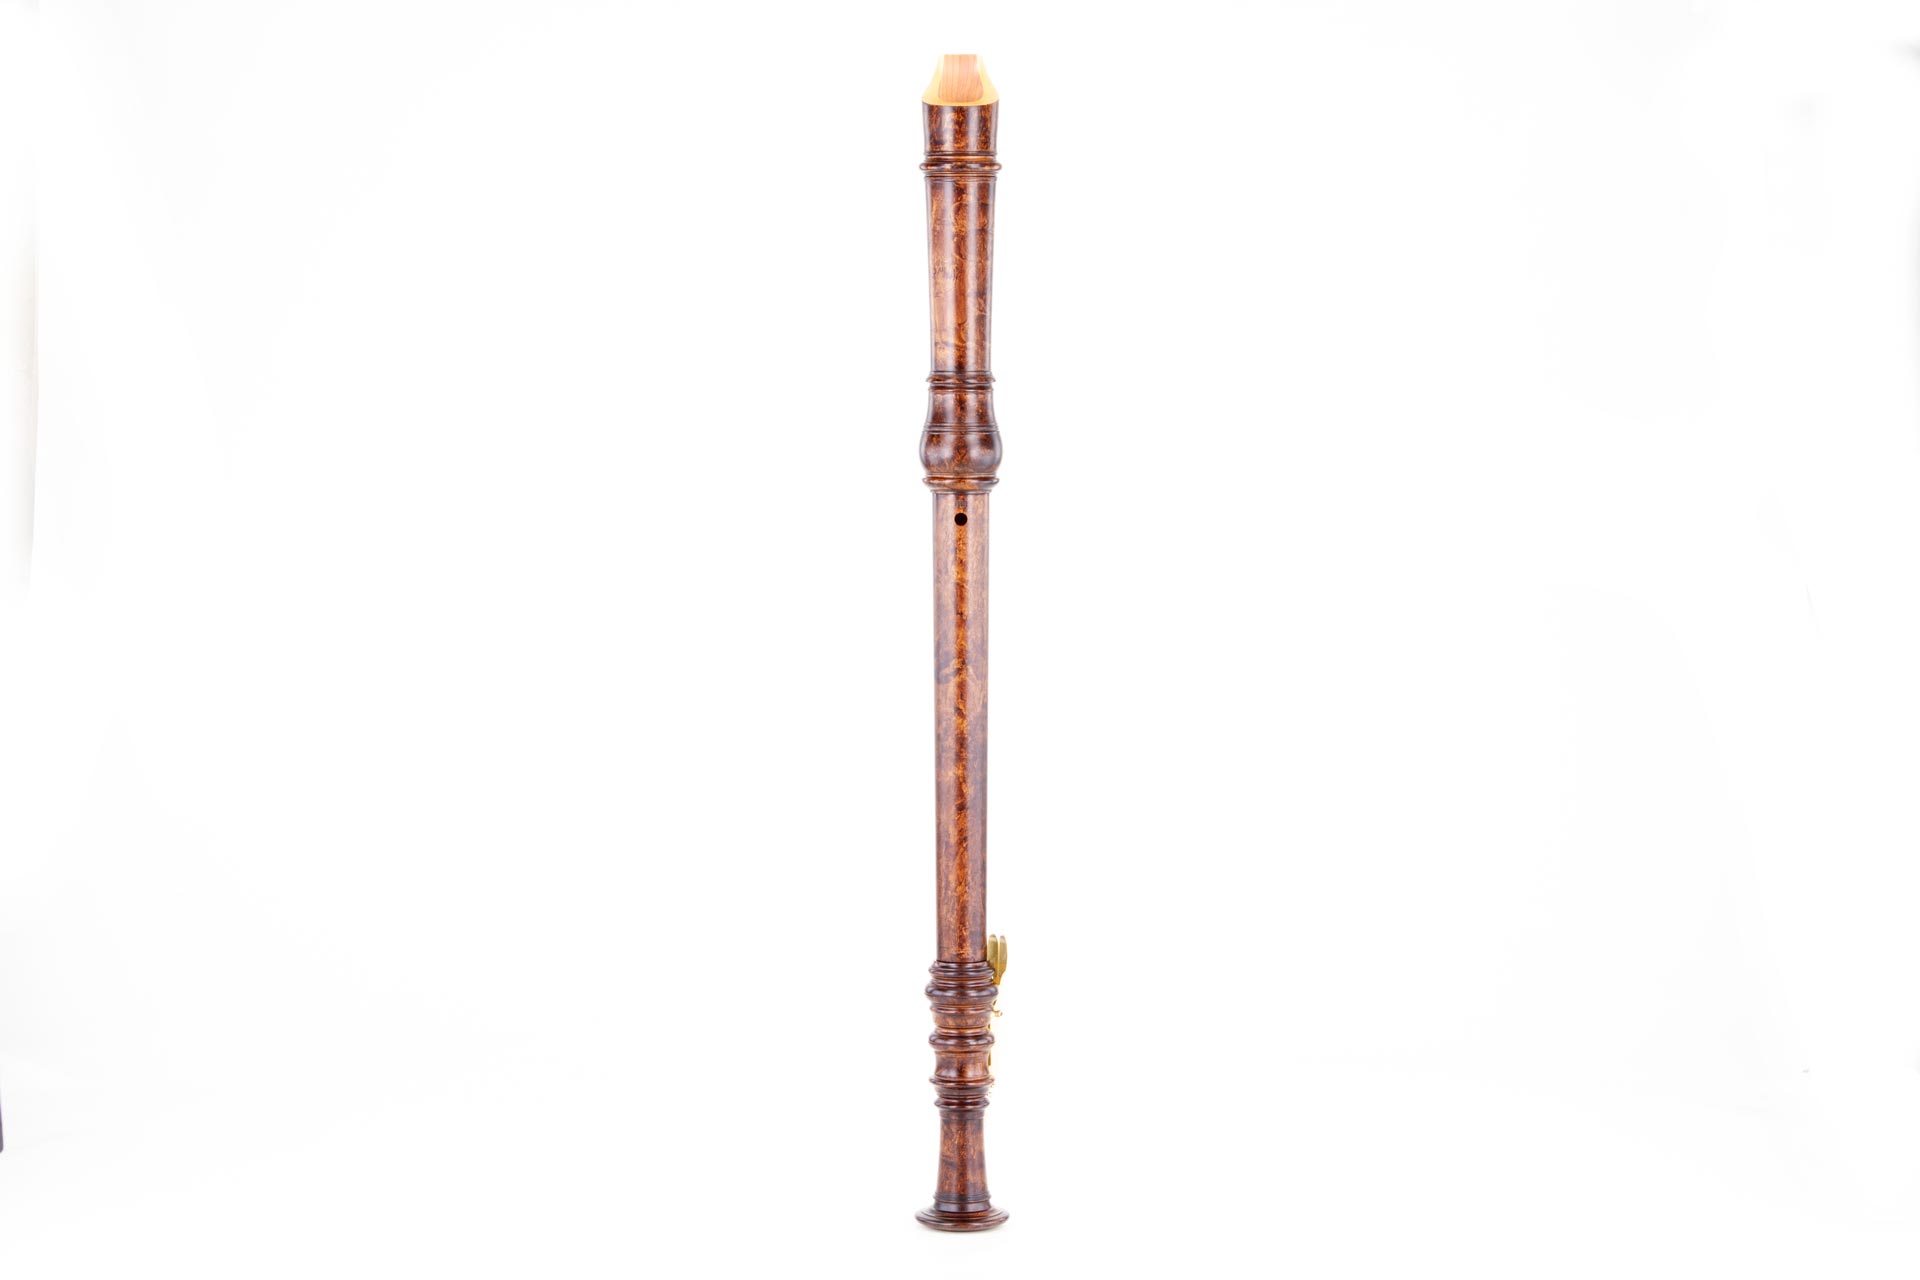 Moeck, "Hotteterre", tenor in c'. baroque double hole, 415 Hz, boxwood antique stained